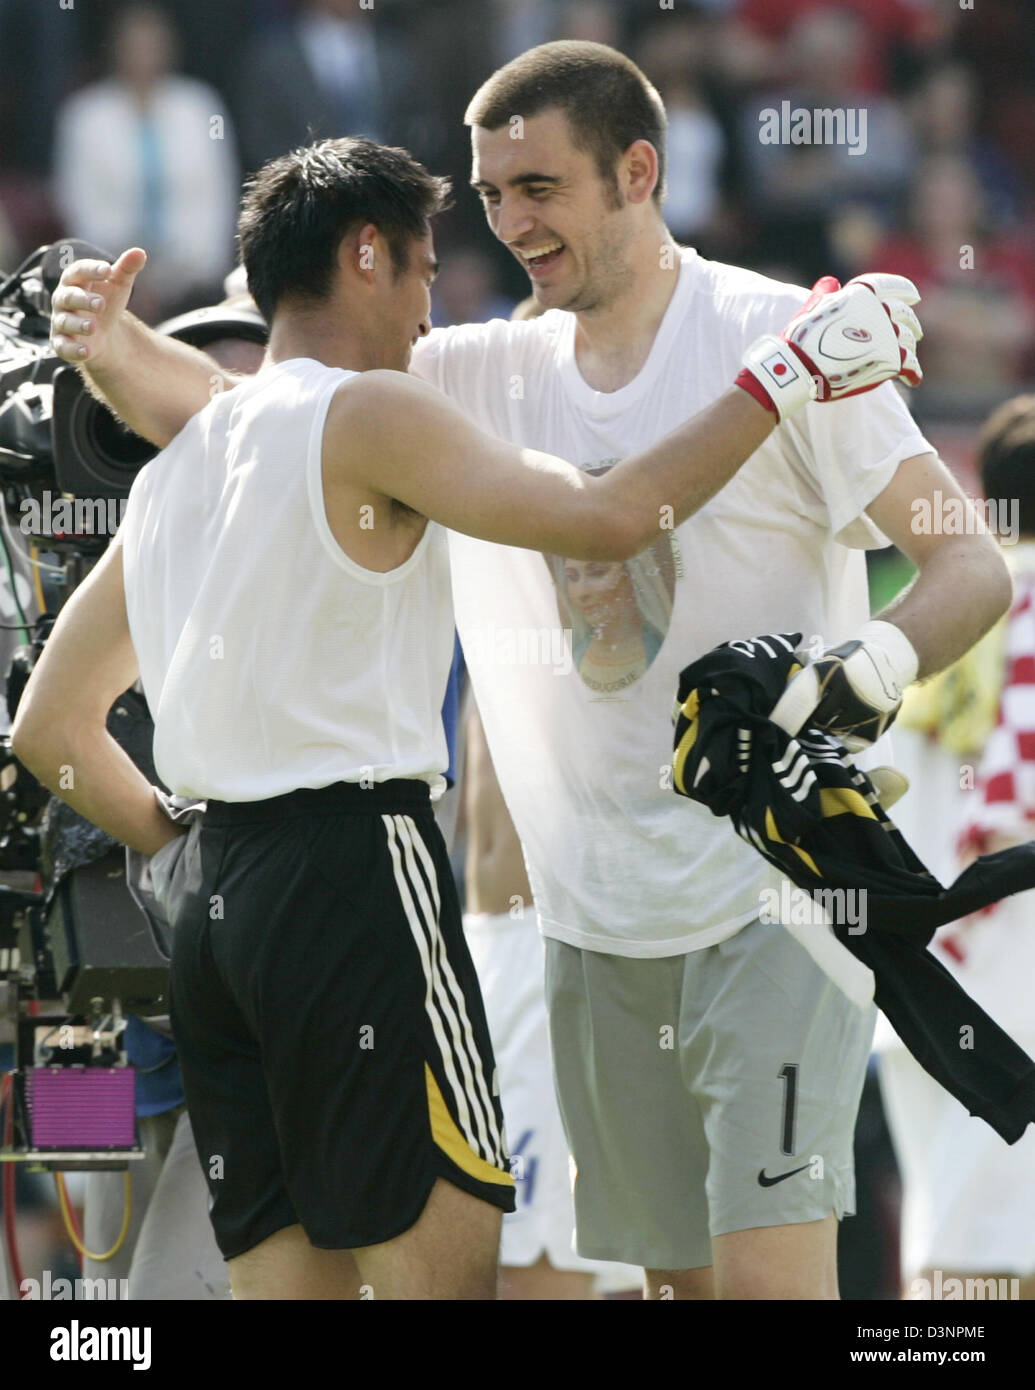 Japanese goalie Yoshikatsu Kawaguchi (L) and his Croatian counterpart Stipe Pletikosa (R) photographed after the group F preliminary match of the 2006 FIFA World Cup between Japan and Croatia in Nuremberg, Germany, Sunday, 18 June 2006. The match ended in a 0-0 draw. Photo: Frank May +++ Mobile Services OUT +++ Please also refer to FIFA's Terms and Conditions. Stock Photo